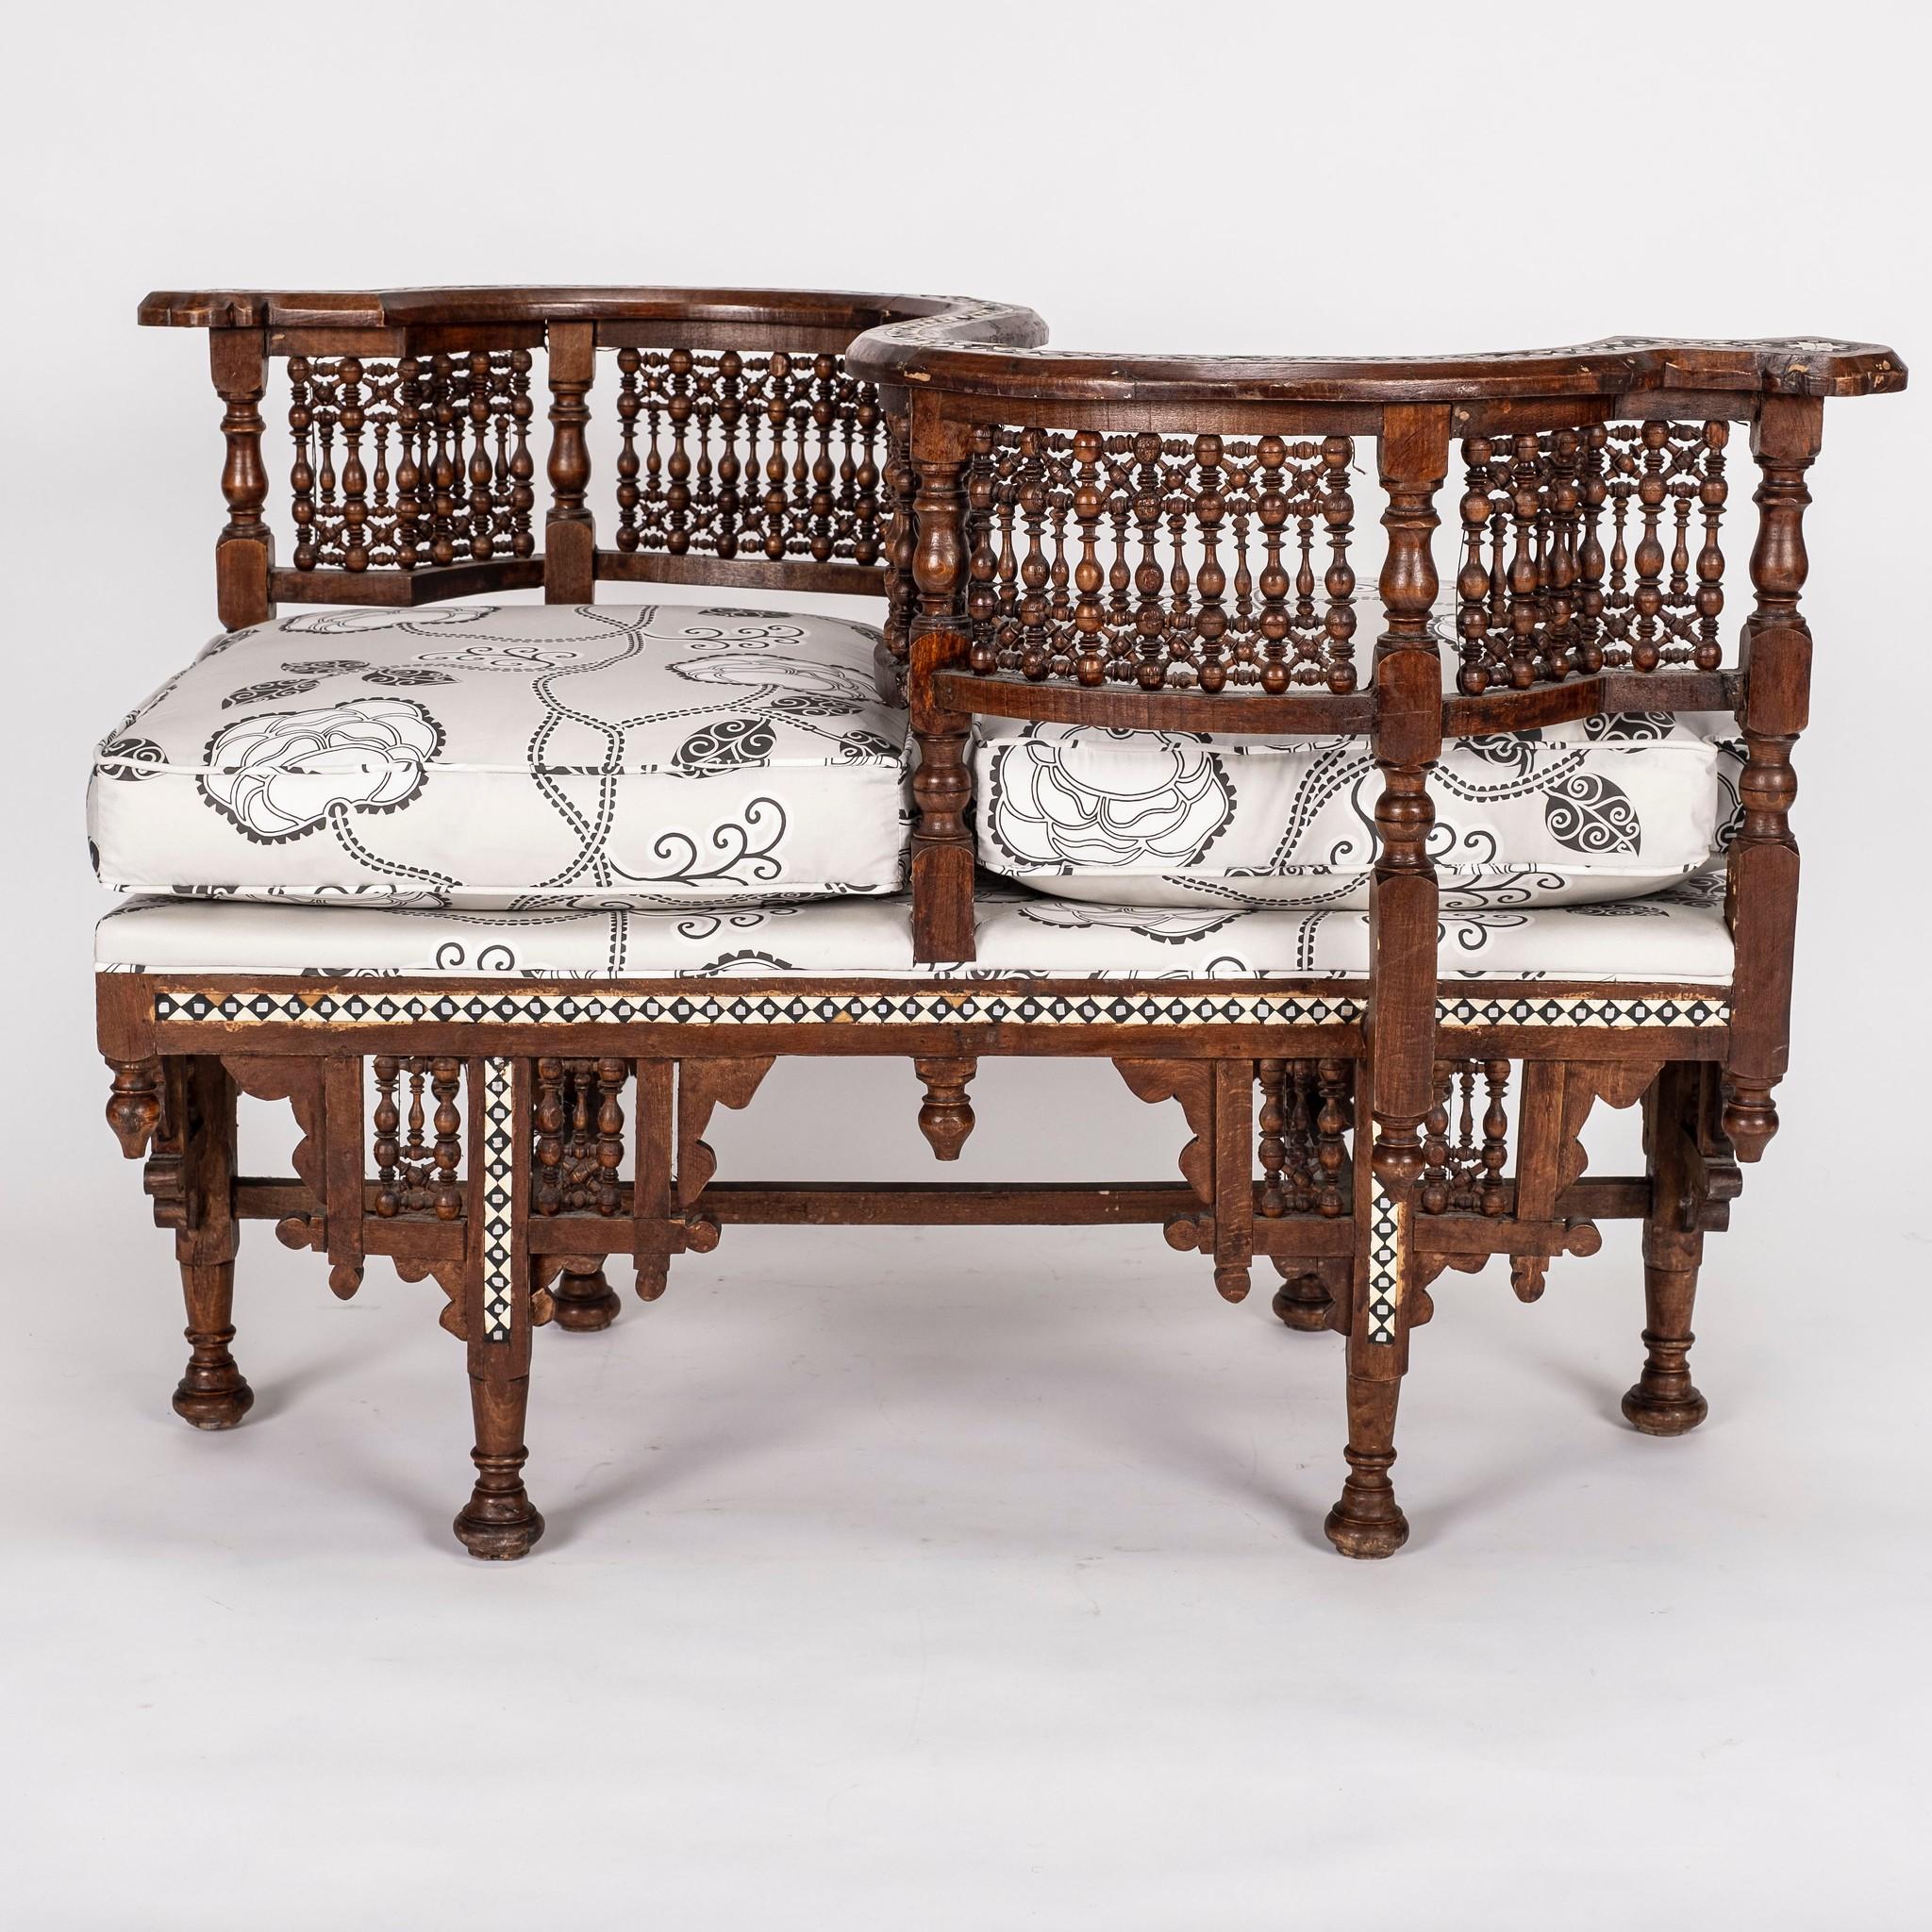 19th century Moroccan tête-à-tête newly upholstered in a stylish Neisha Crosland Silver White Queen Fruit chintz by Schumacher. This charming frame features fretwork, spindles and mother of pearl inlay.

Condition: Sturdy hardwood Frame in good to